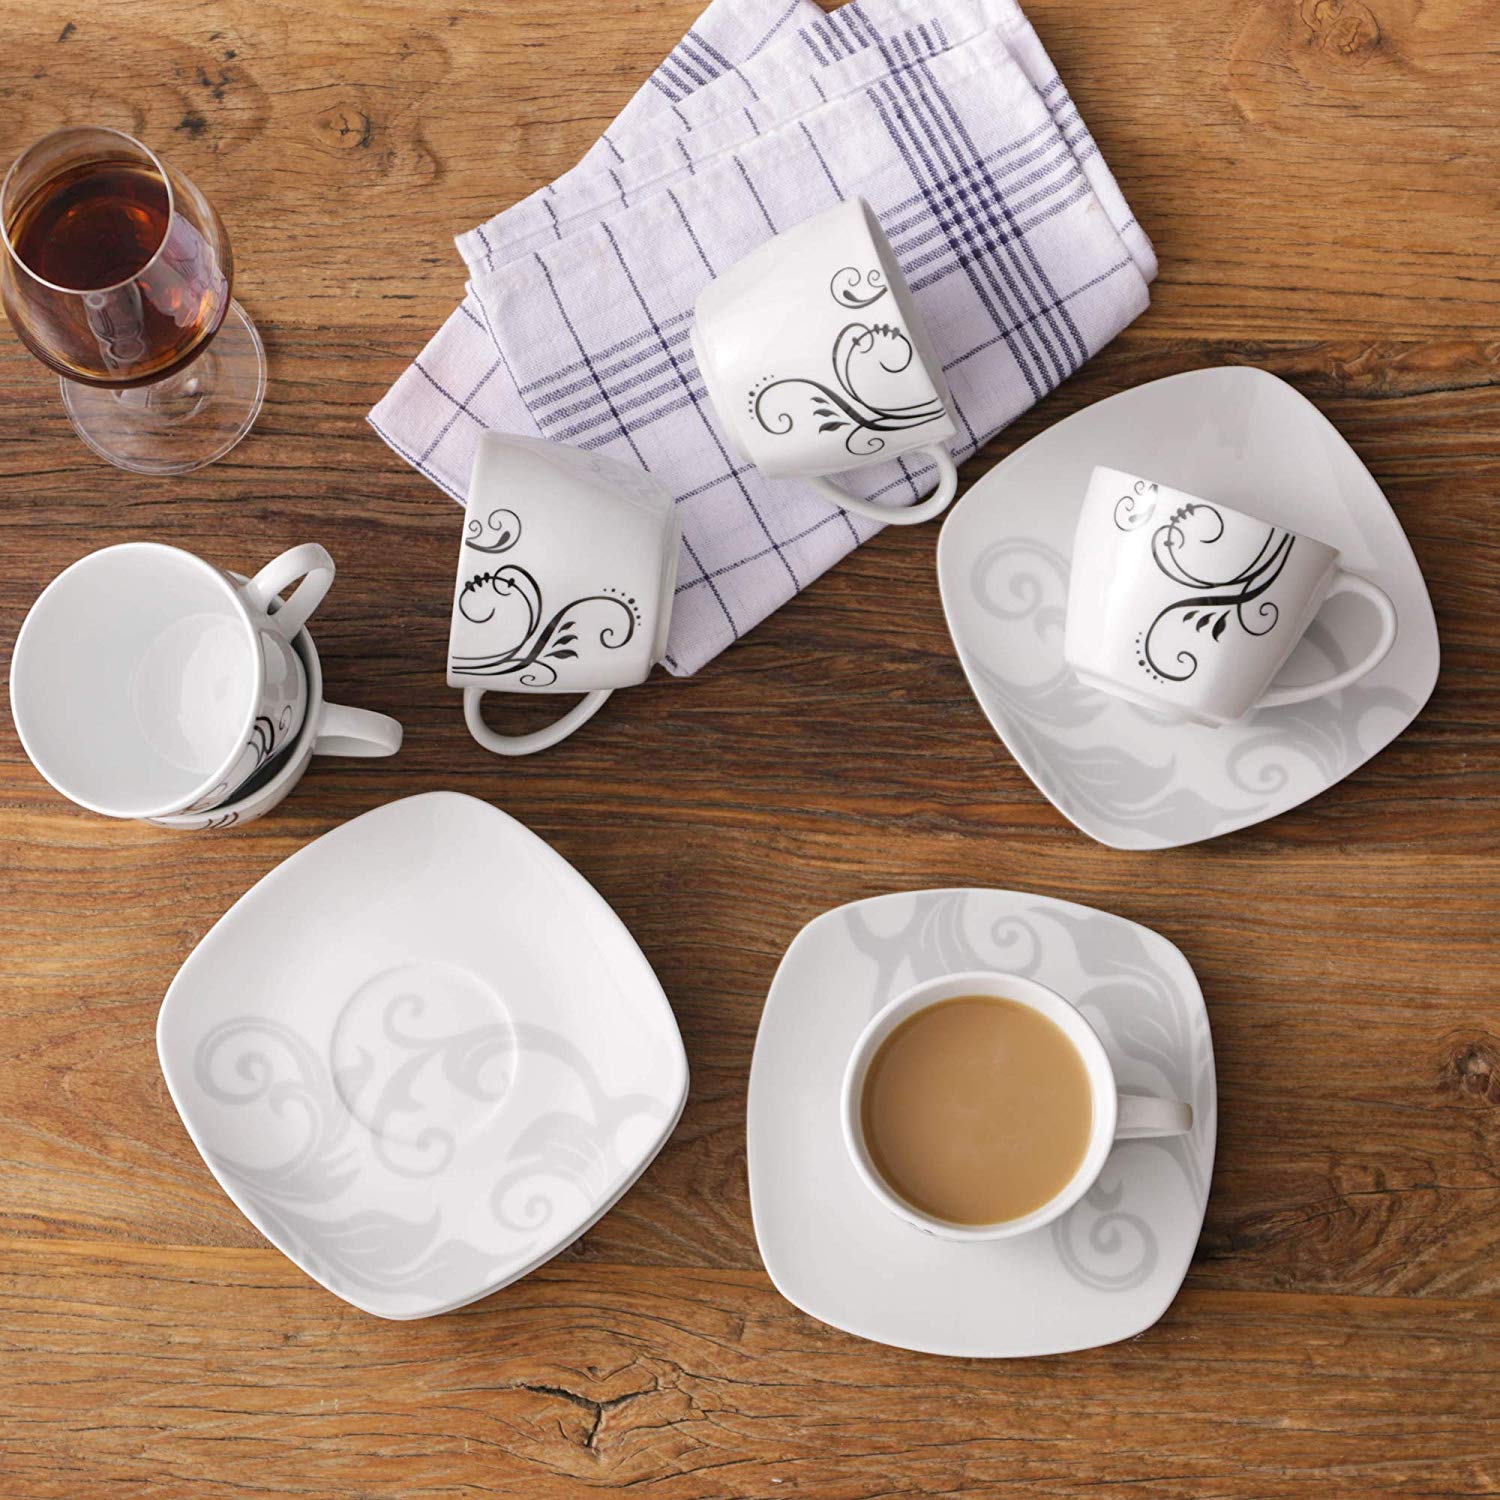 Zoye 12-Piece Ceramic Porcelain Drinkware  Cups and Saucers Set (360 ml) - Nordic Side - 12, and, Ceramic, Coffee, Cups, Drinkware, Espresso, Family, Kitchen, Office, Piece, Porcelain, Saucer